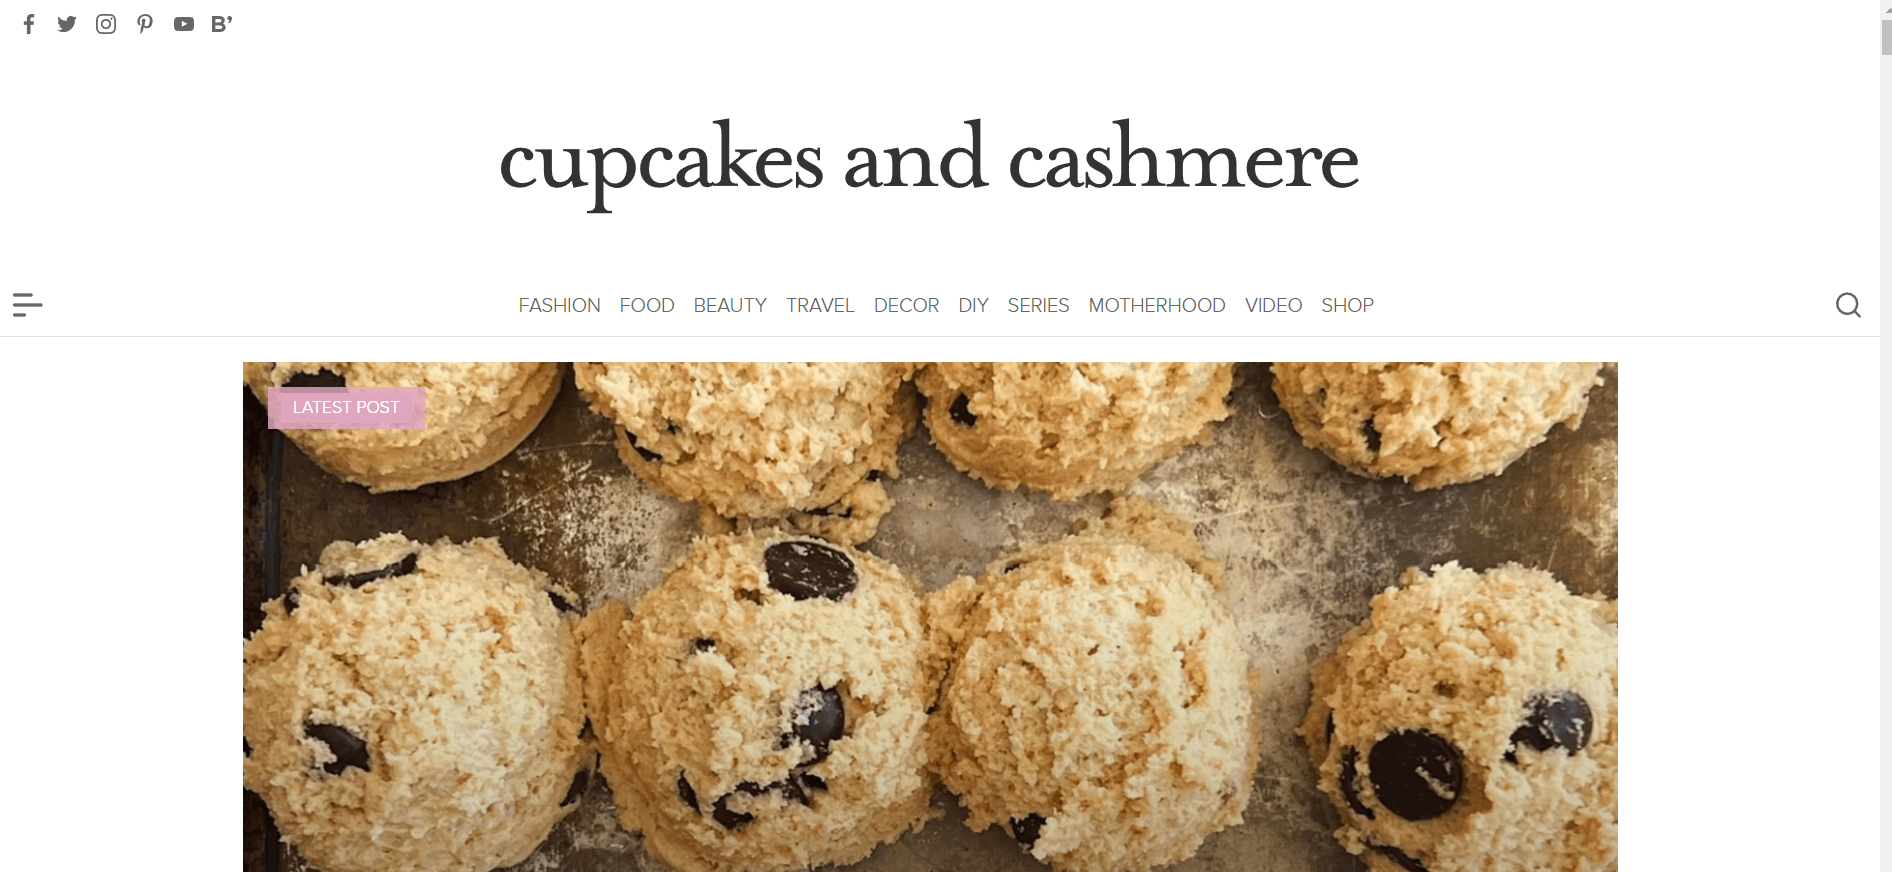 Lifestyle blog names - Cupcakes and Cashmere